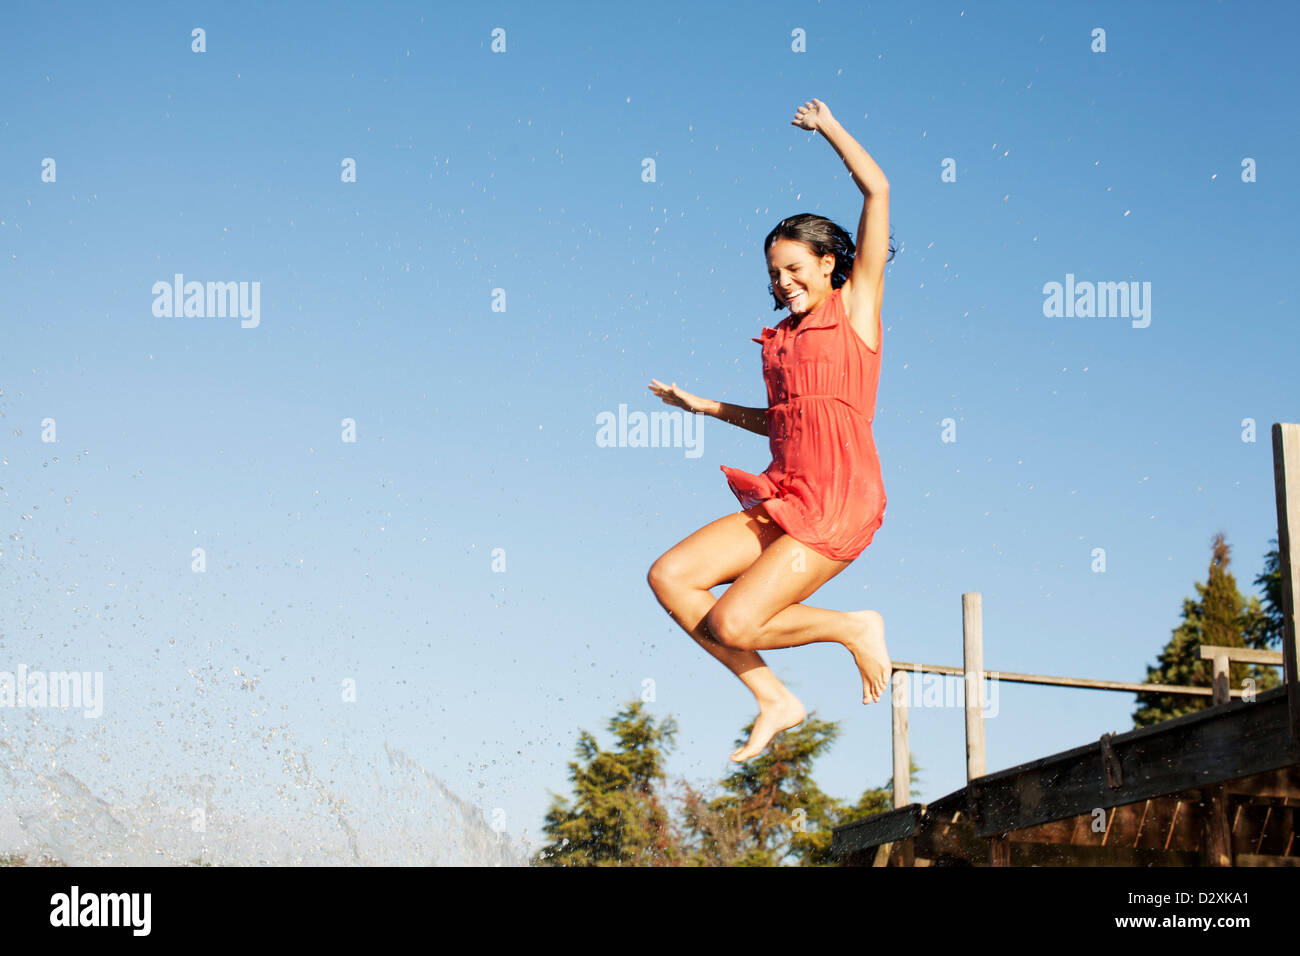 Smiling woman jumping off dock Stock Photo